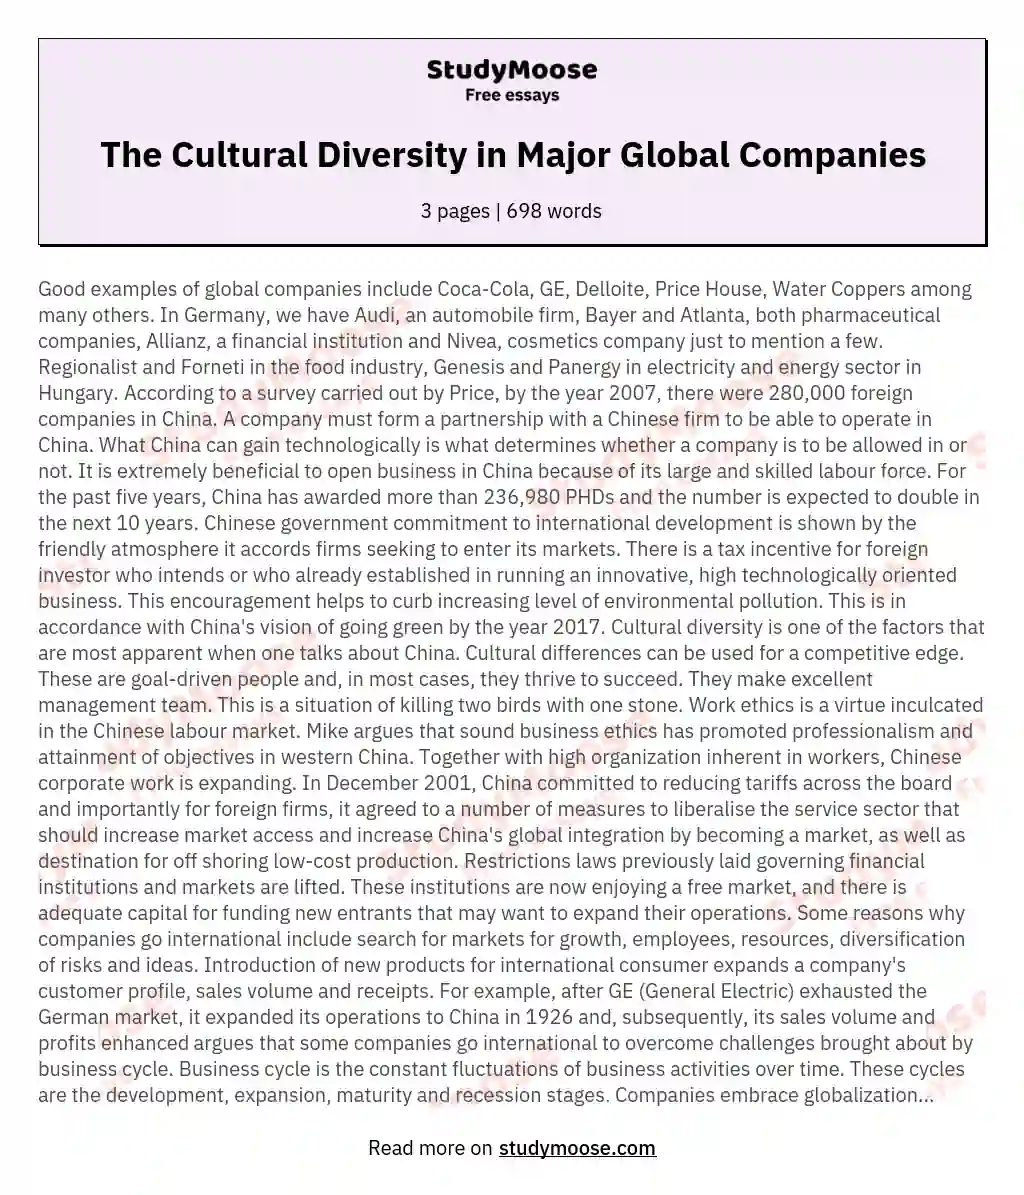 The Cultural Diversity in Major Global Companies essay